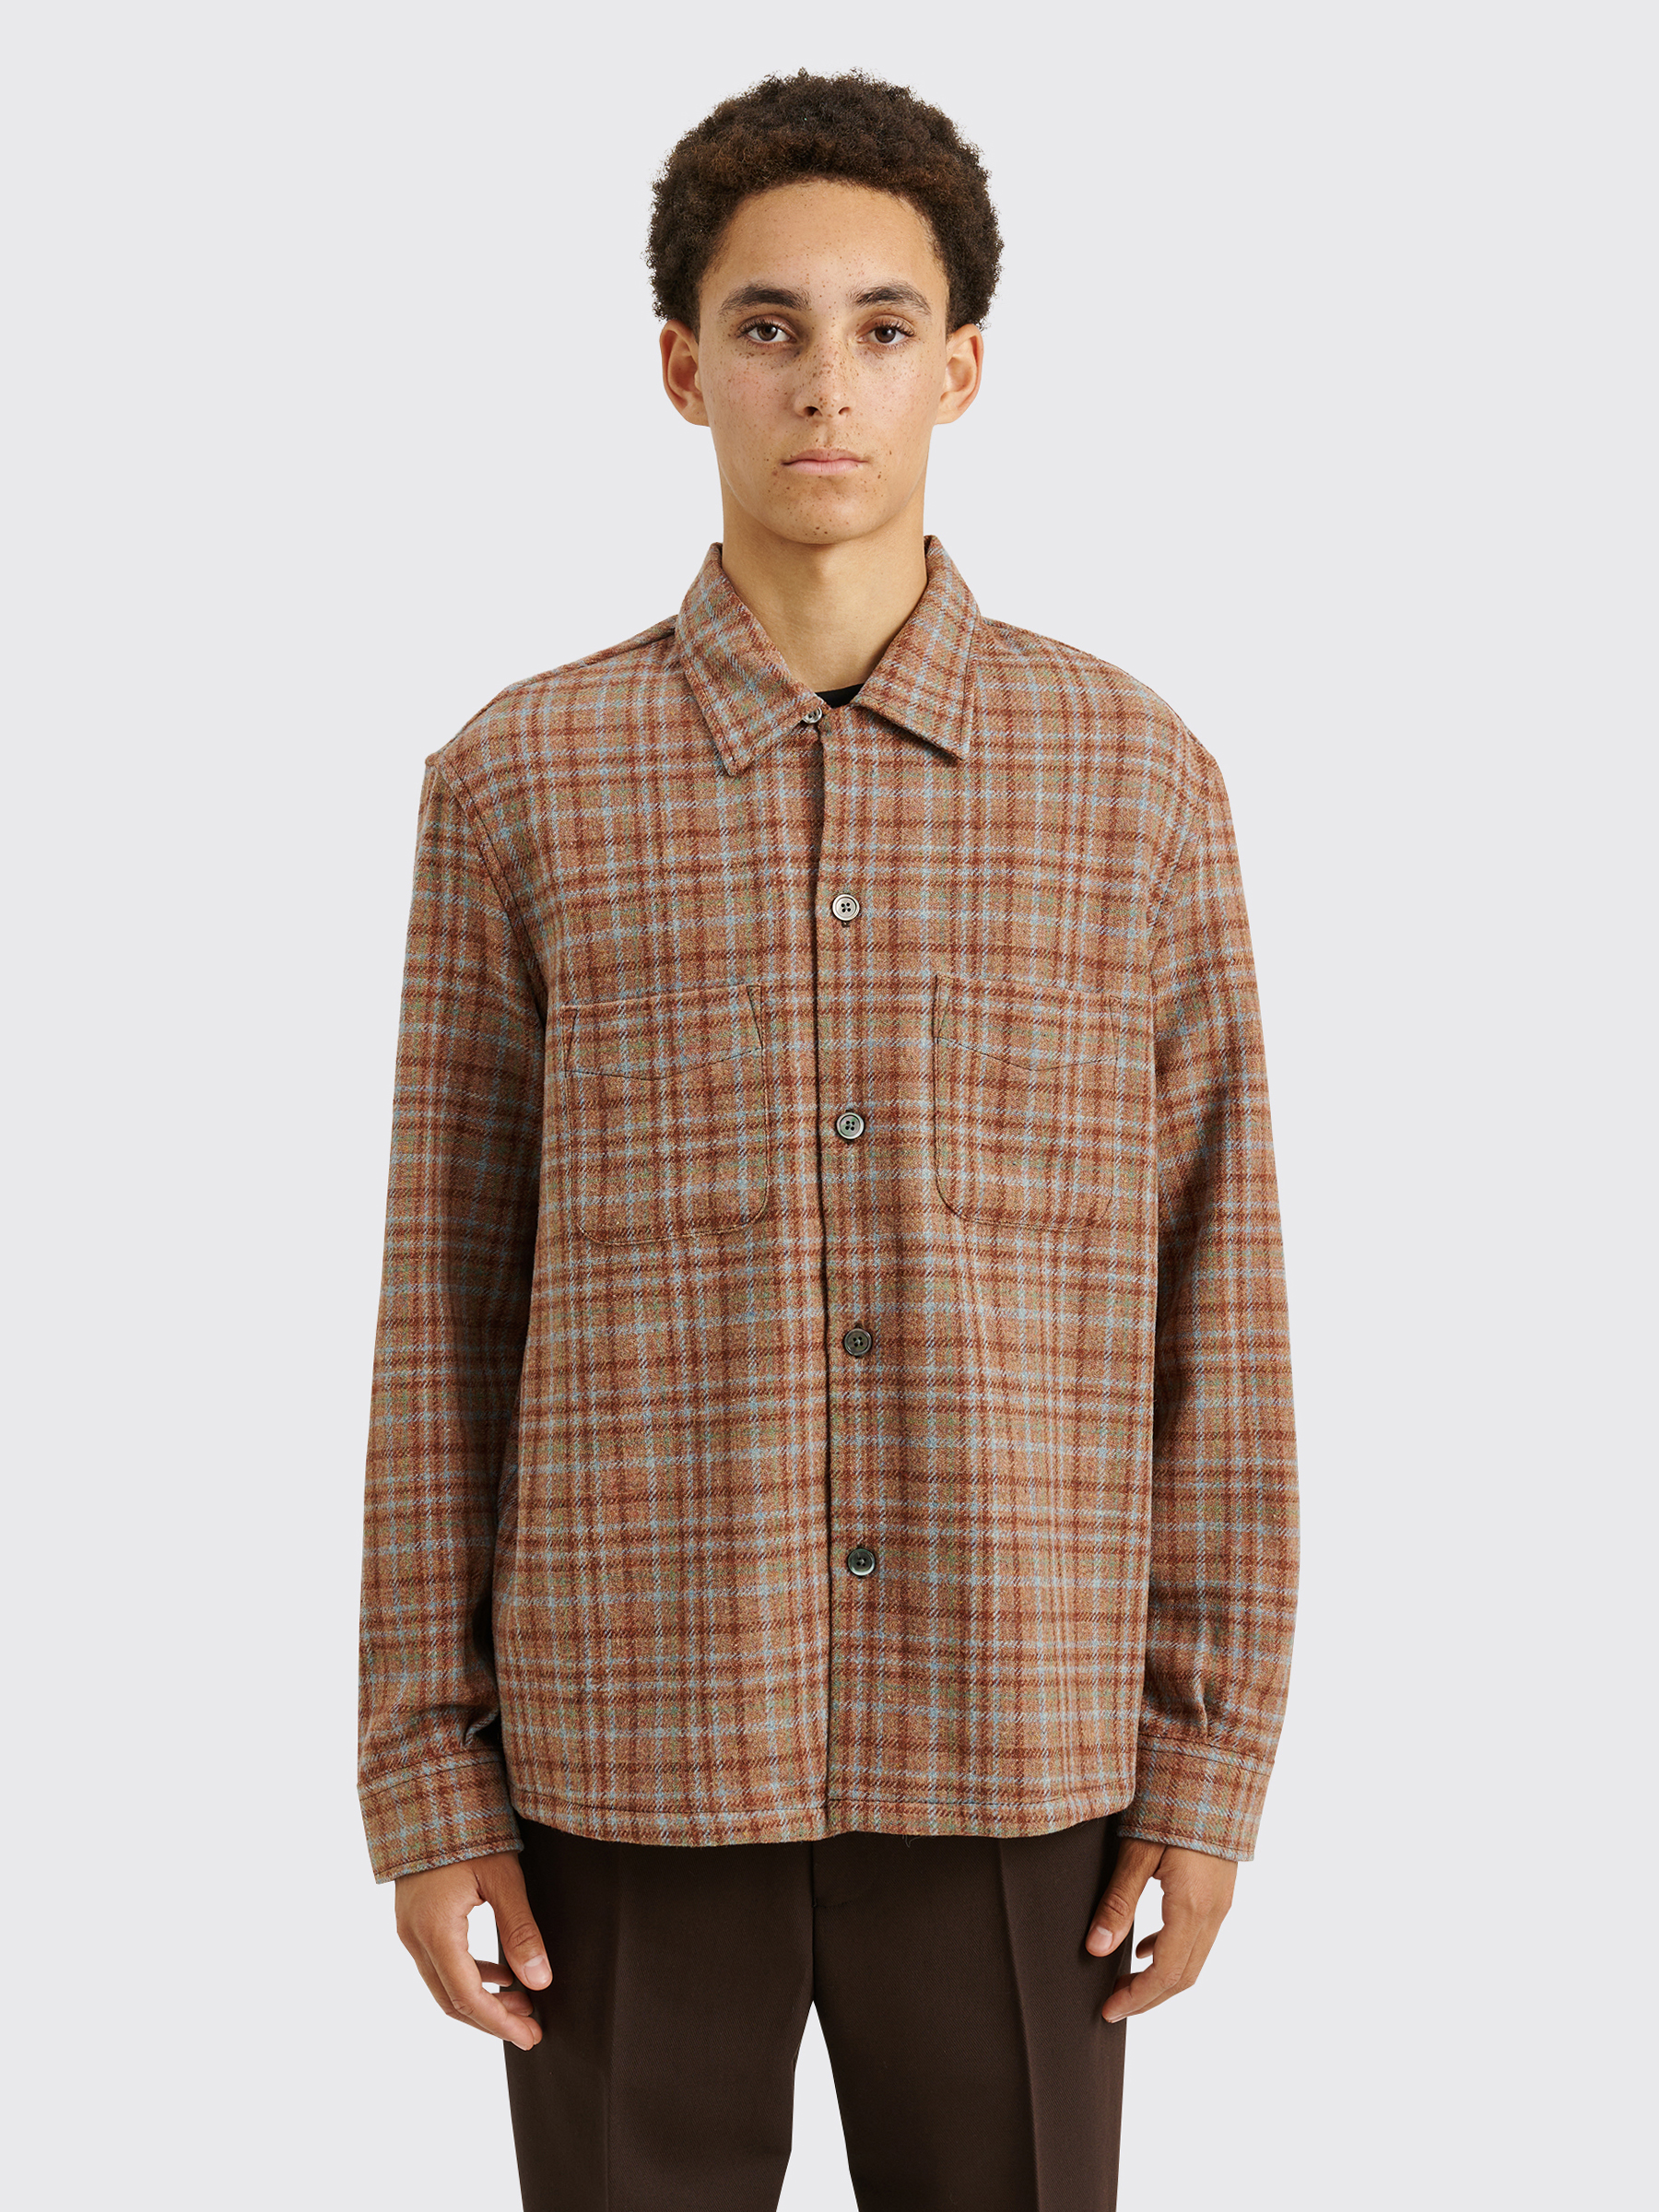 selectの商品新品未使用 23SS OUR LEGACY CHECK SHIRT - シャツ